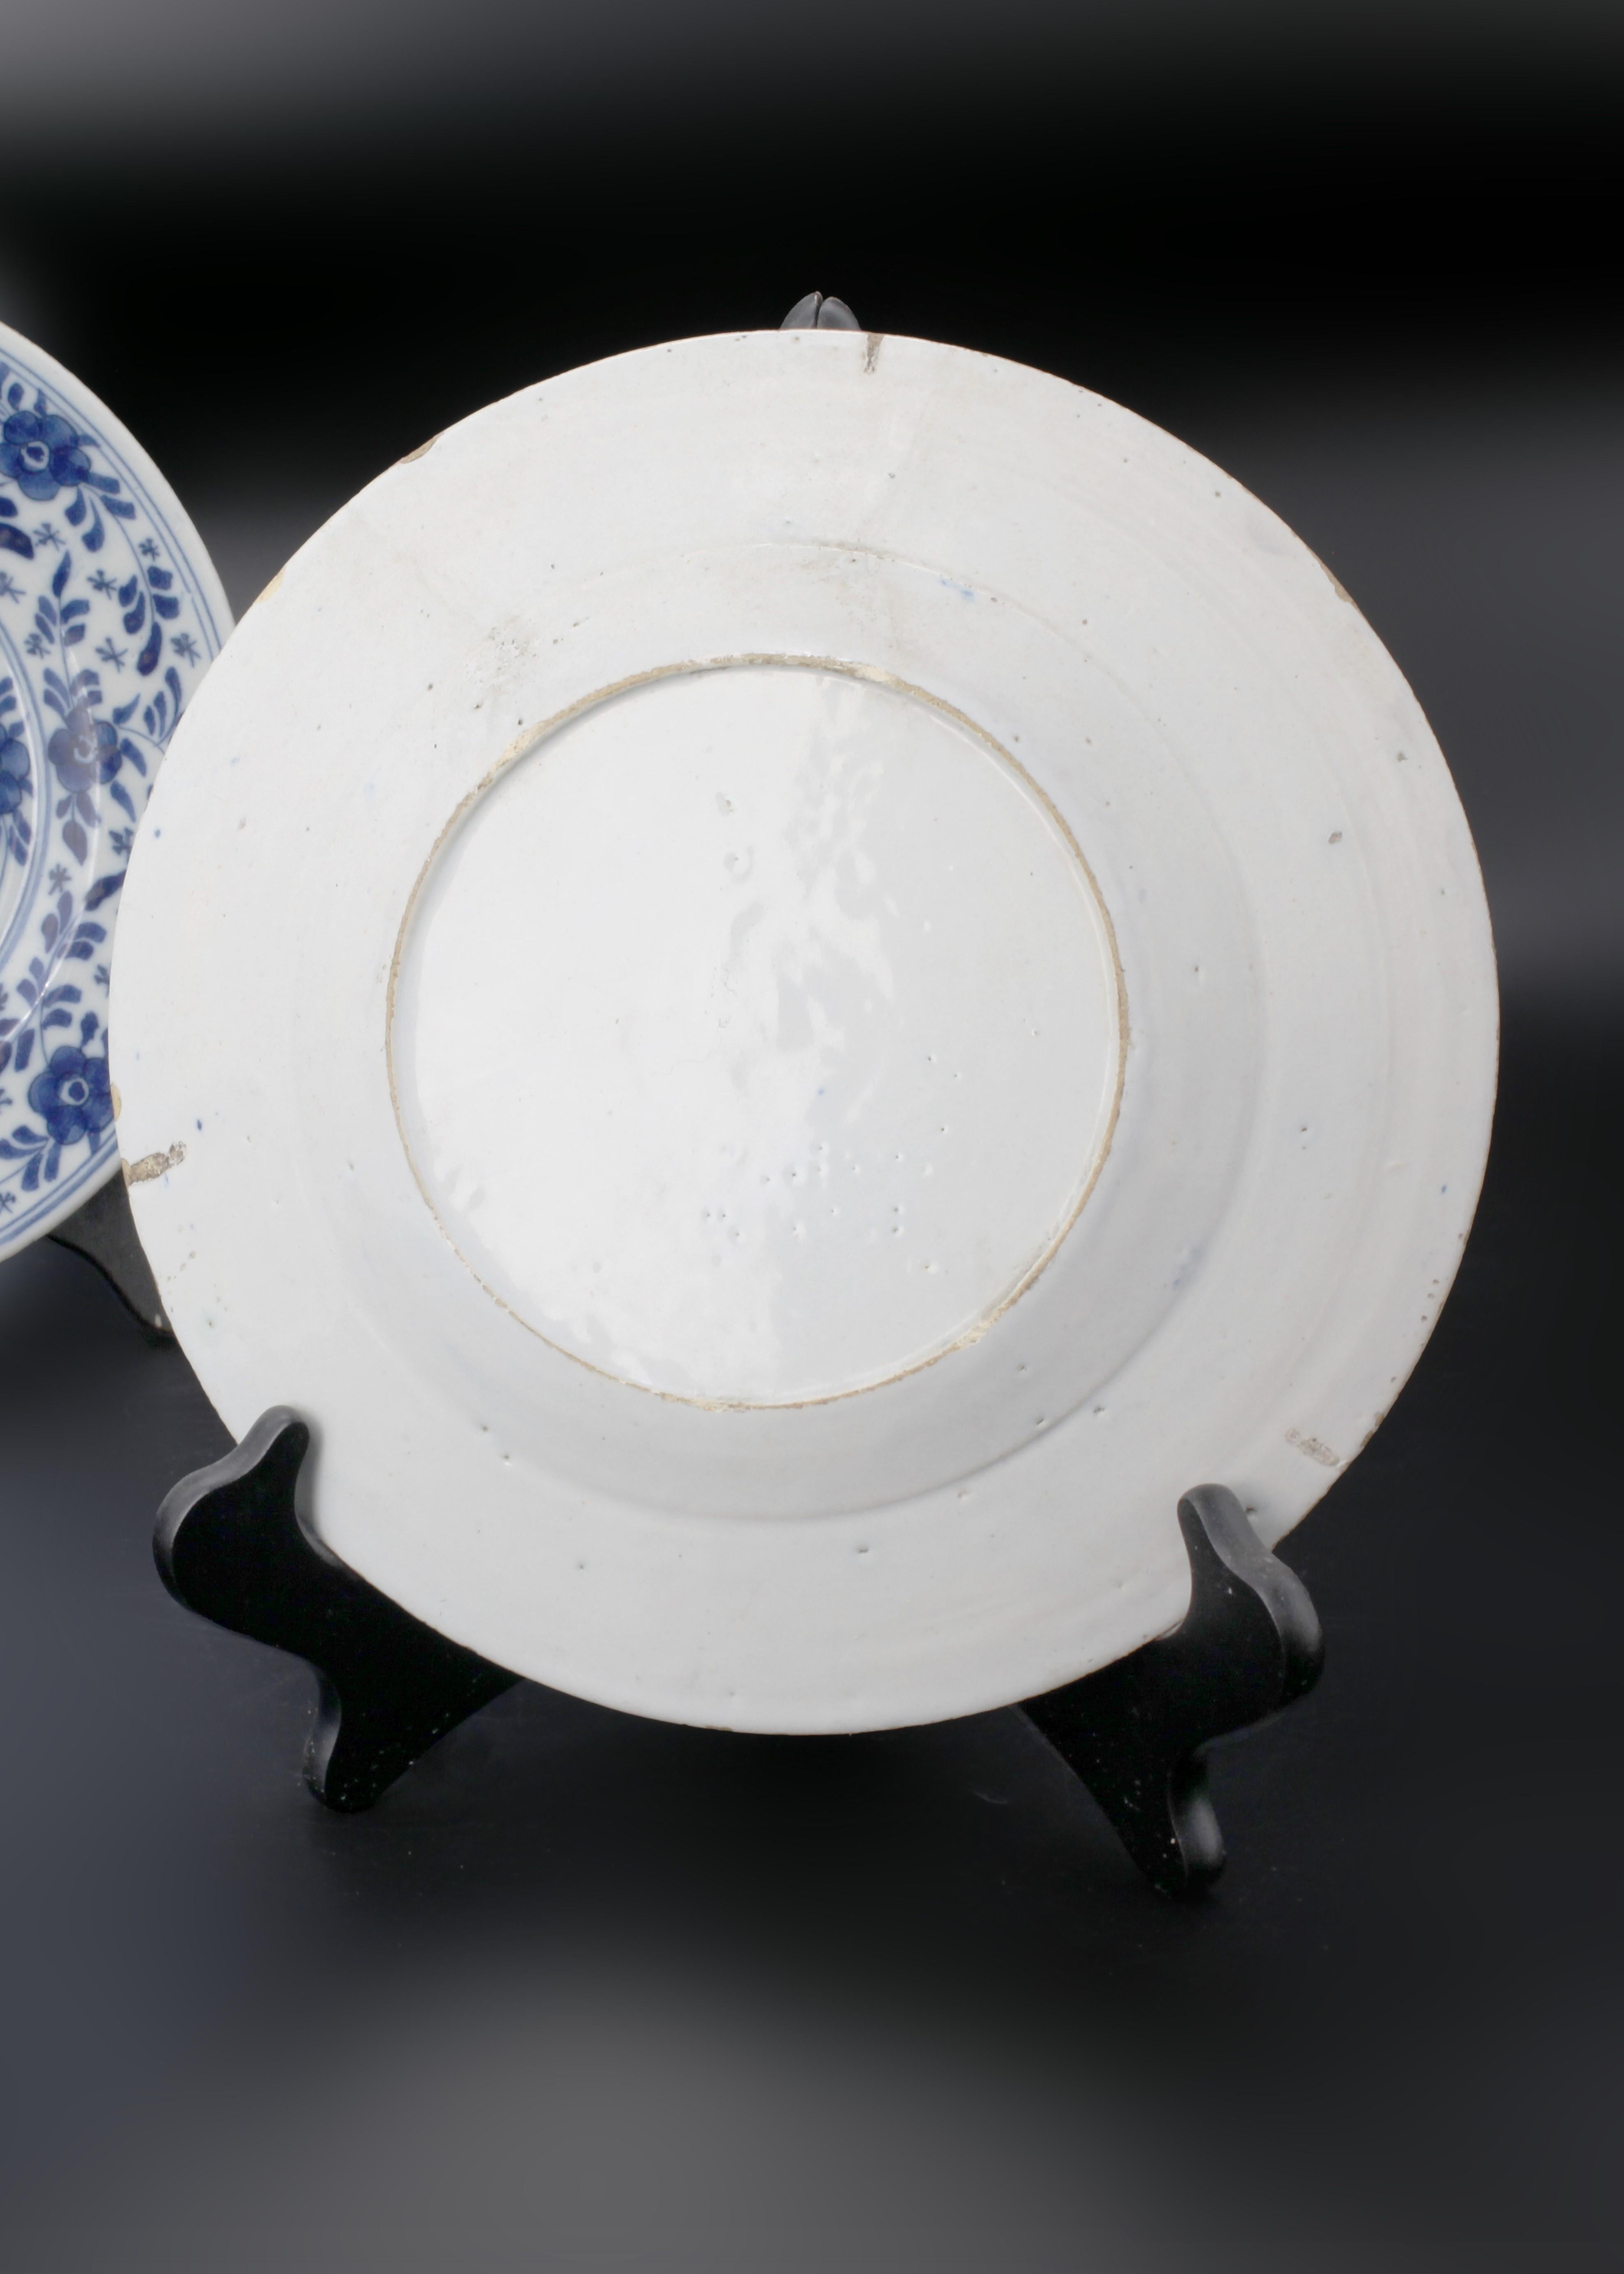 Add a touch of the 18th-century Dutch craftsmanship to your collection and watch as dutch elegance blooms on ceramic with these symmetry-perfect 18th-century delft blue & white faience plates. Adorned with stunning floral and foliate patterns, they